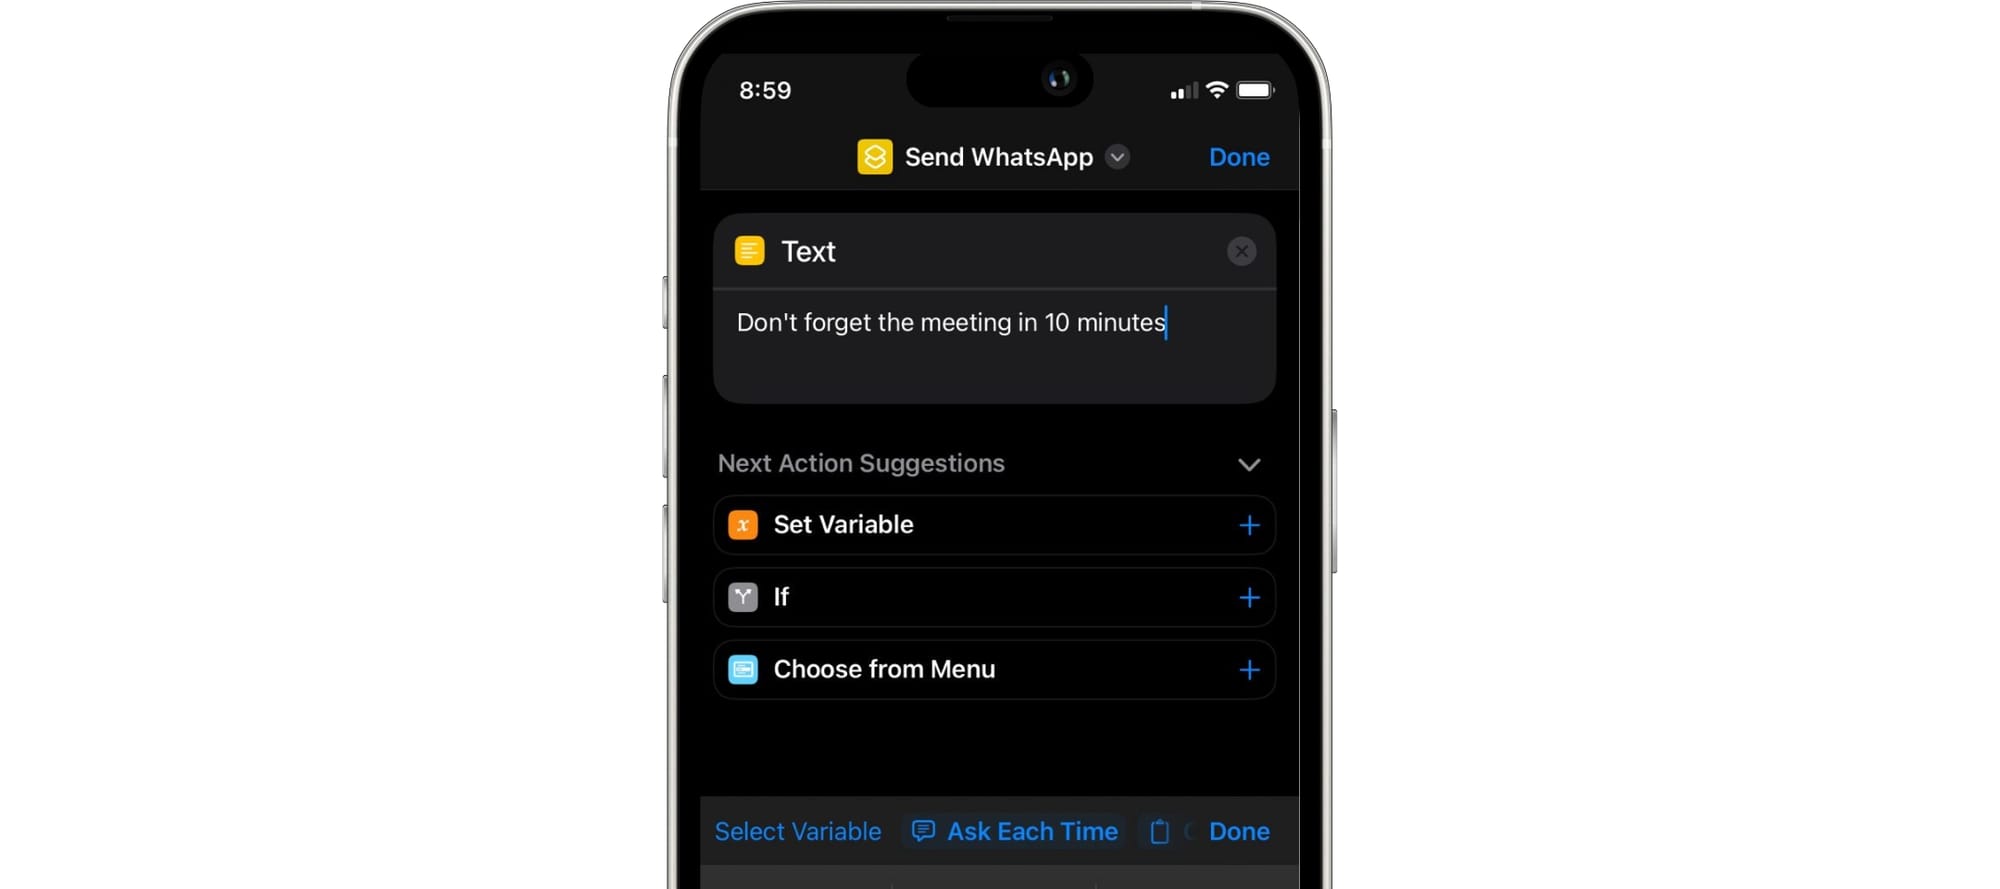 How to Schedule WhatsApp Messages with Shortcuts and Automation on iOS